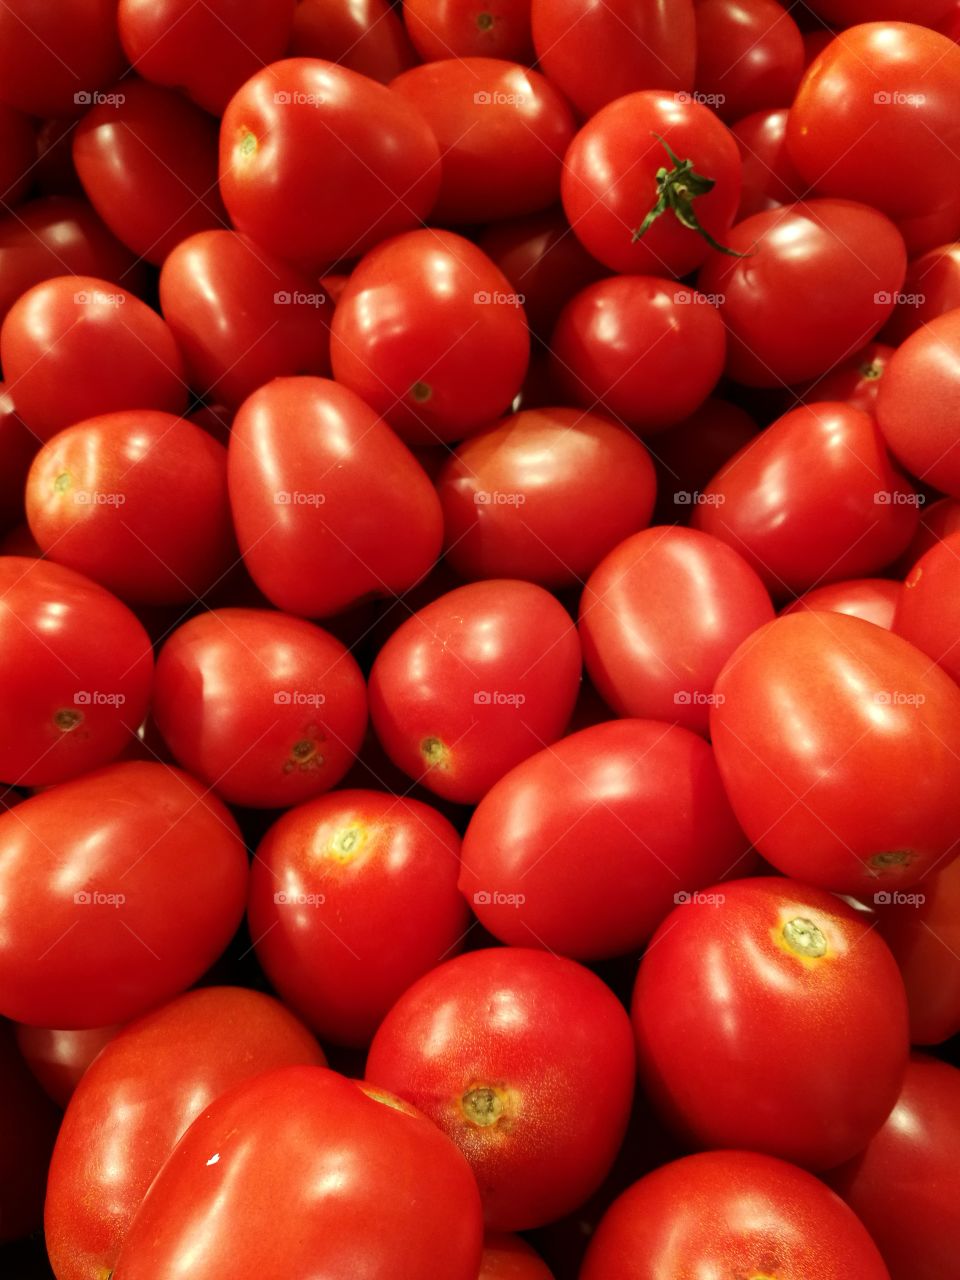 Closeup of ripe tomatoes with round shape and red color.